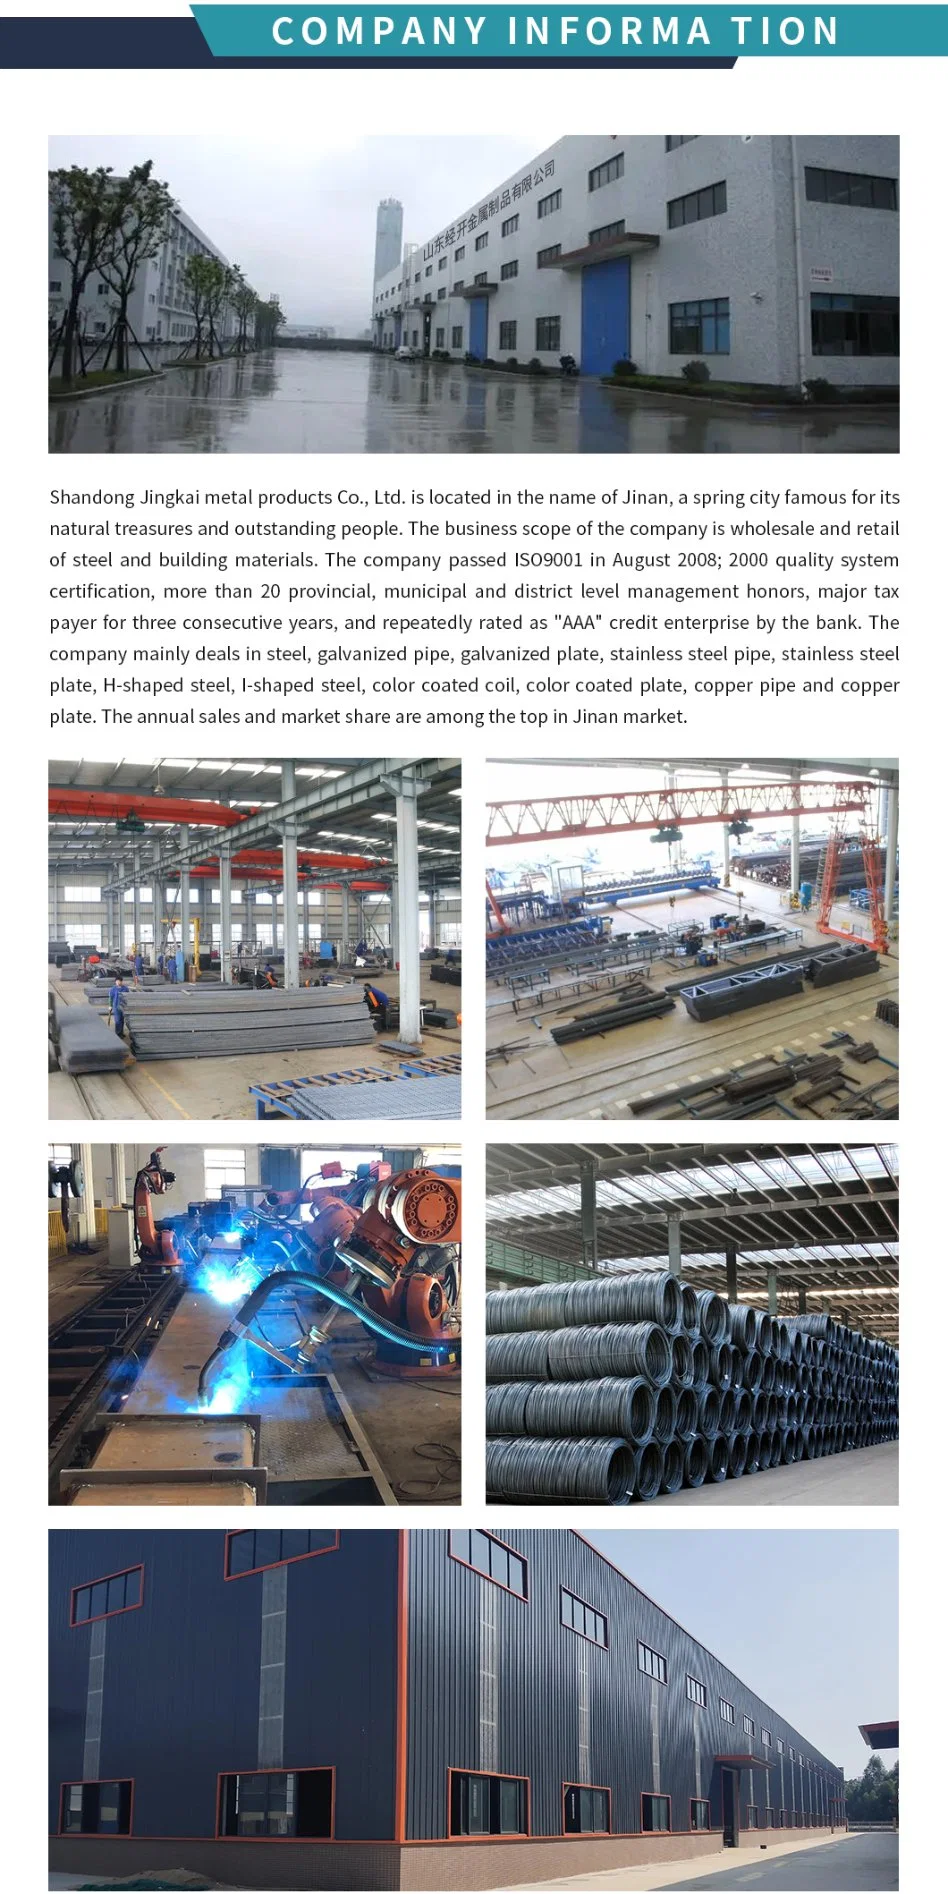 Pregalvanized Welded Square Pipe/Steel Pipe/Hot-Rolled/Round/Low-Carbon/Manufacturer/Mild Steel Pipe/Seamless Tube/Corrosion and High Temperature Resistant